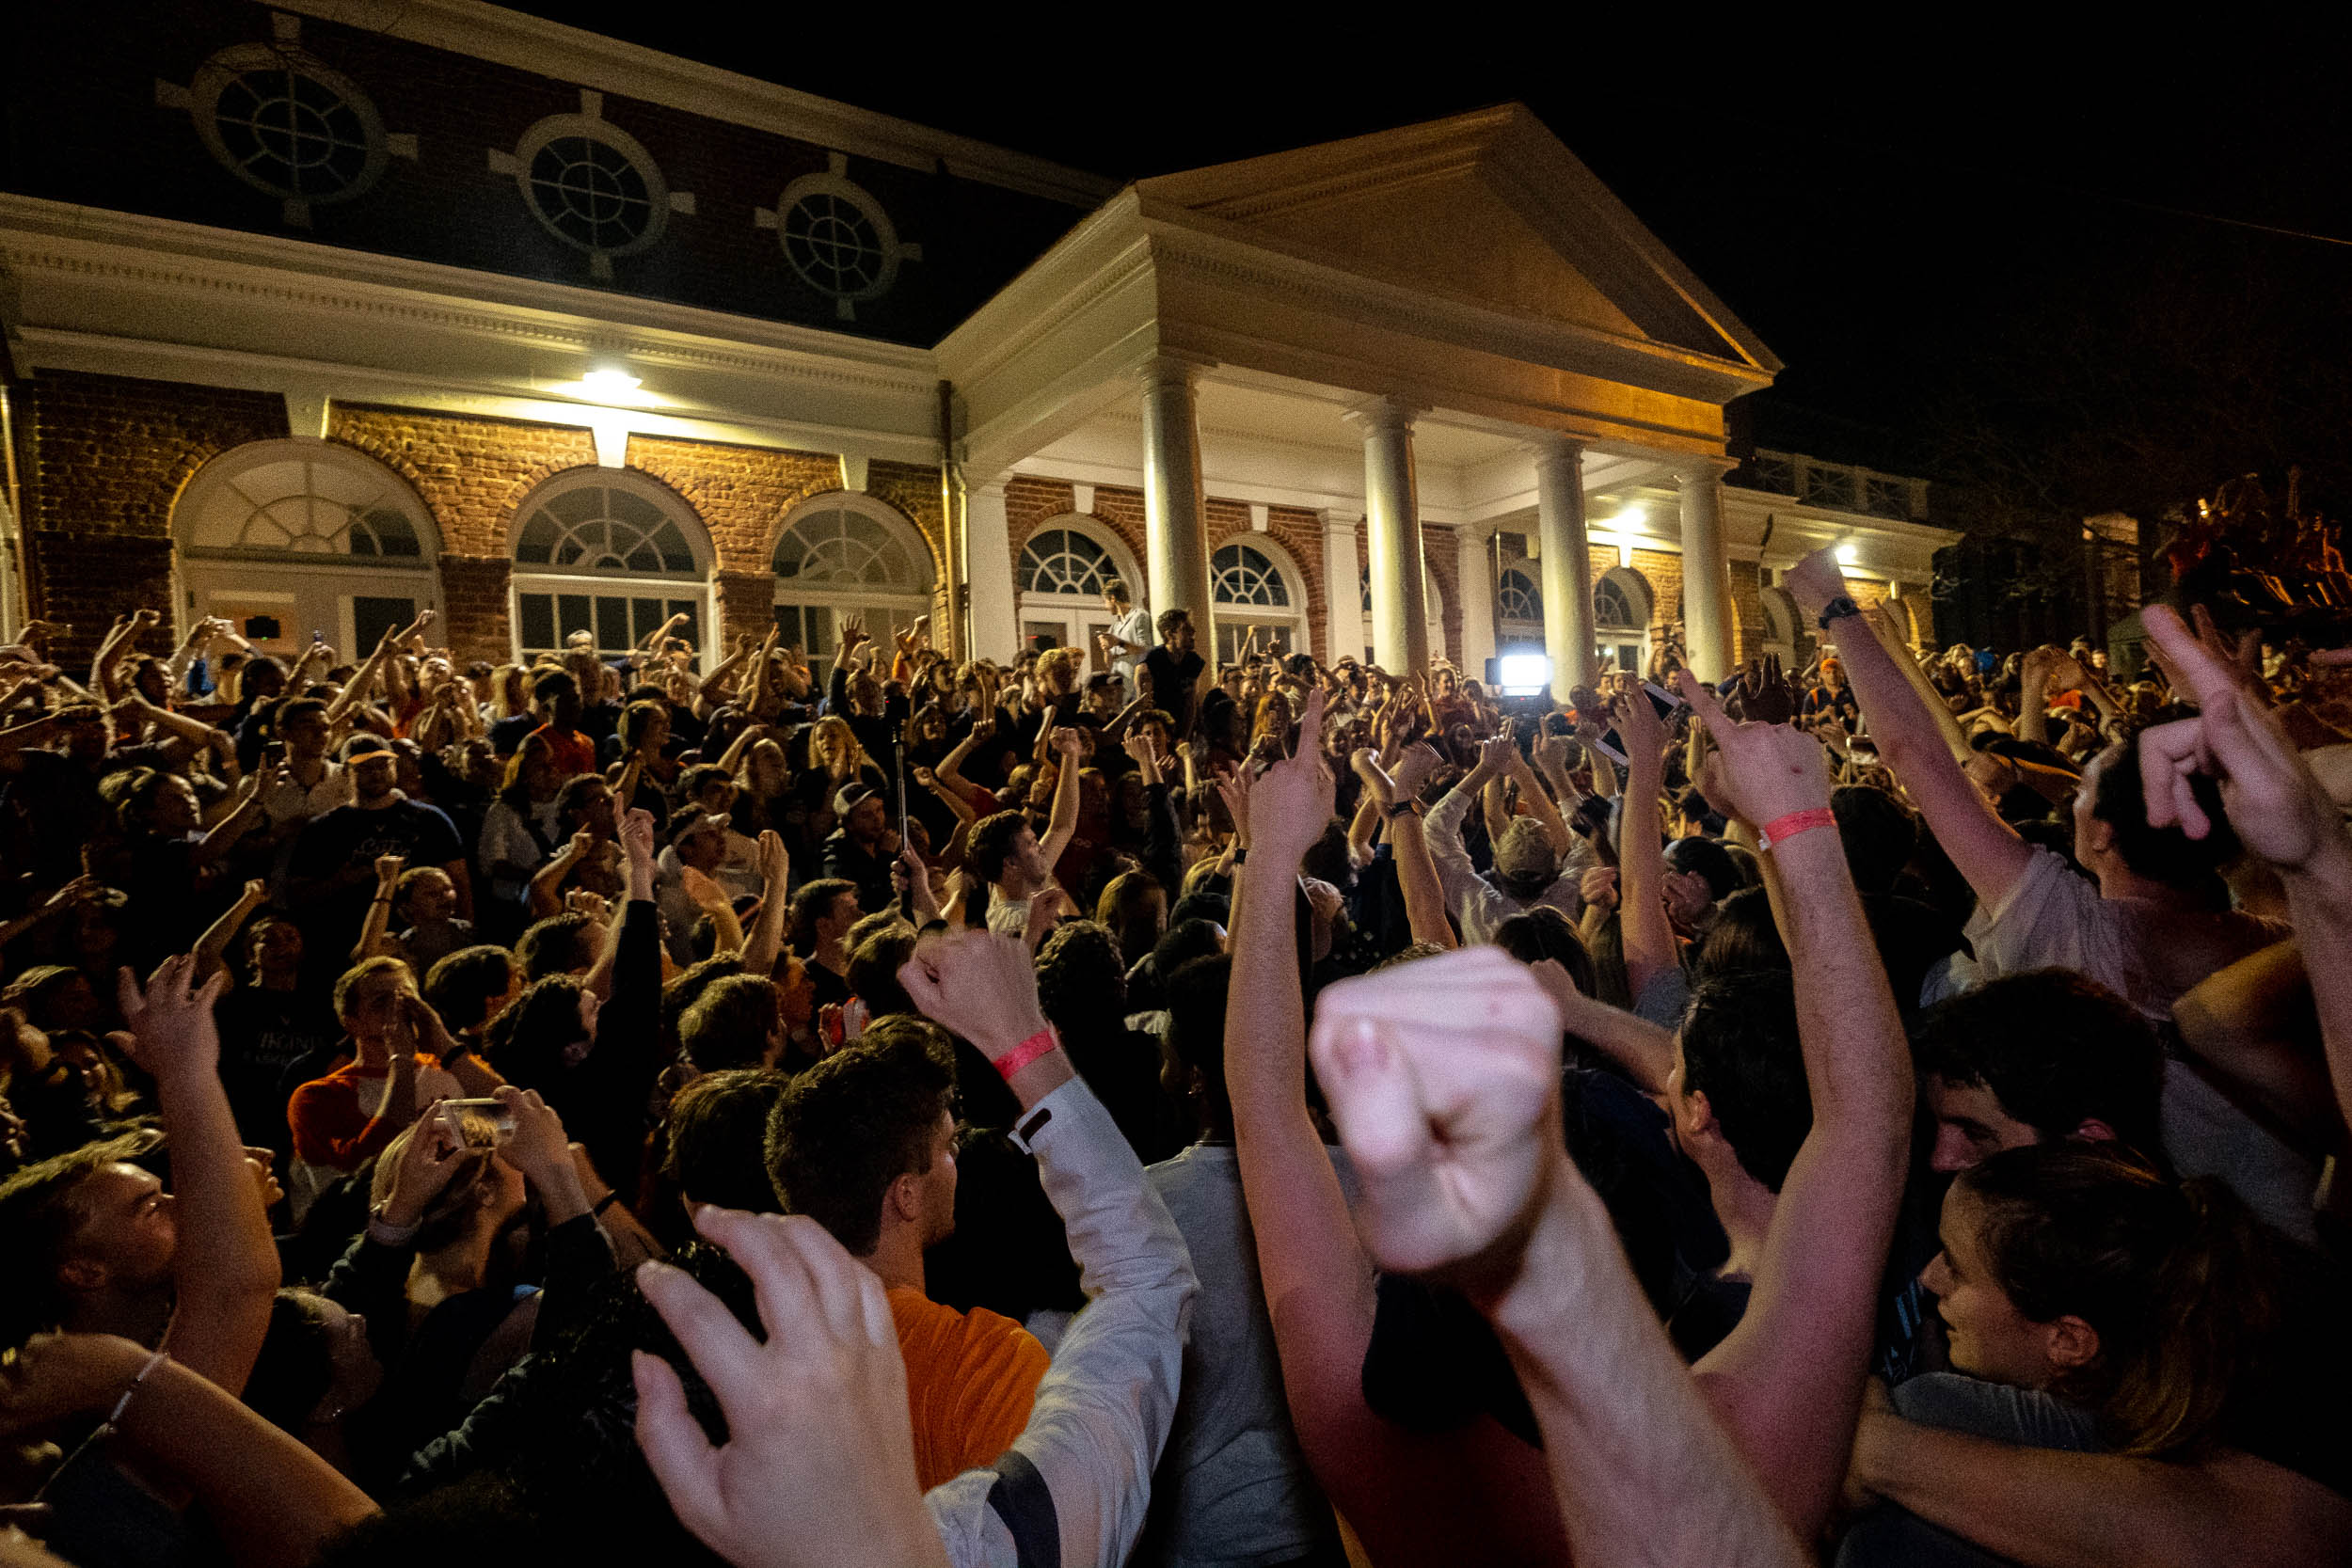 UVA fans outside of a building cheering and celebrating